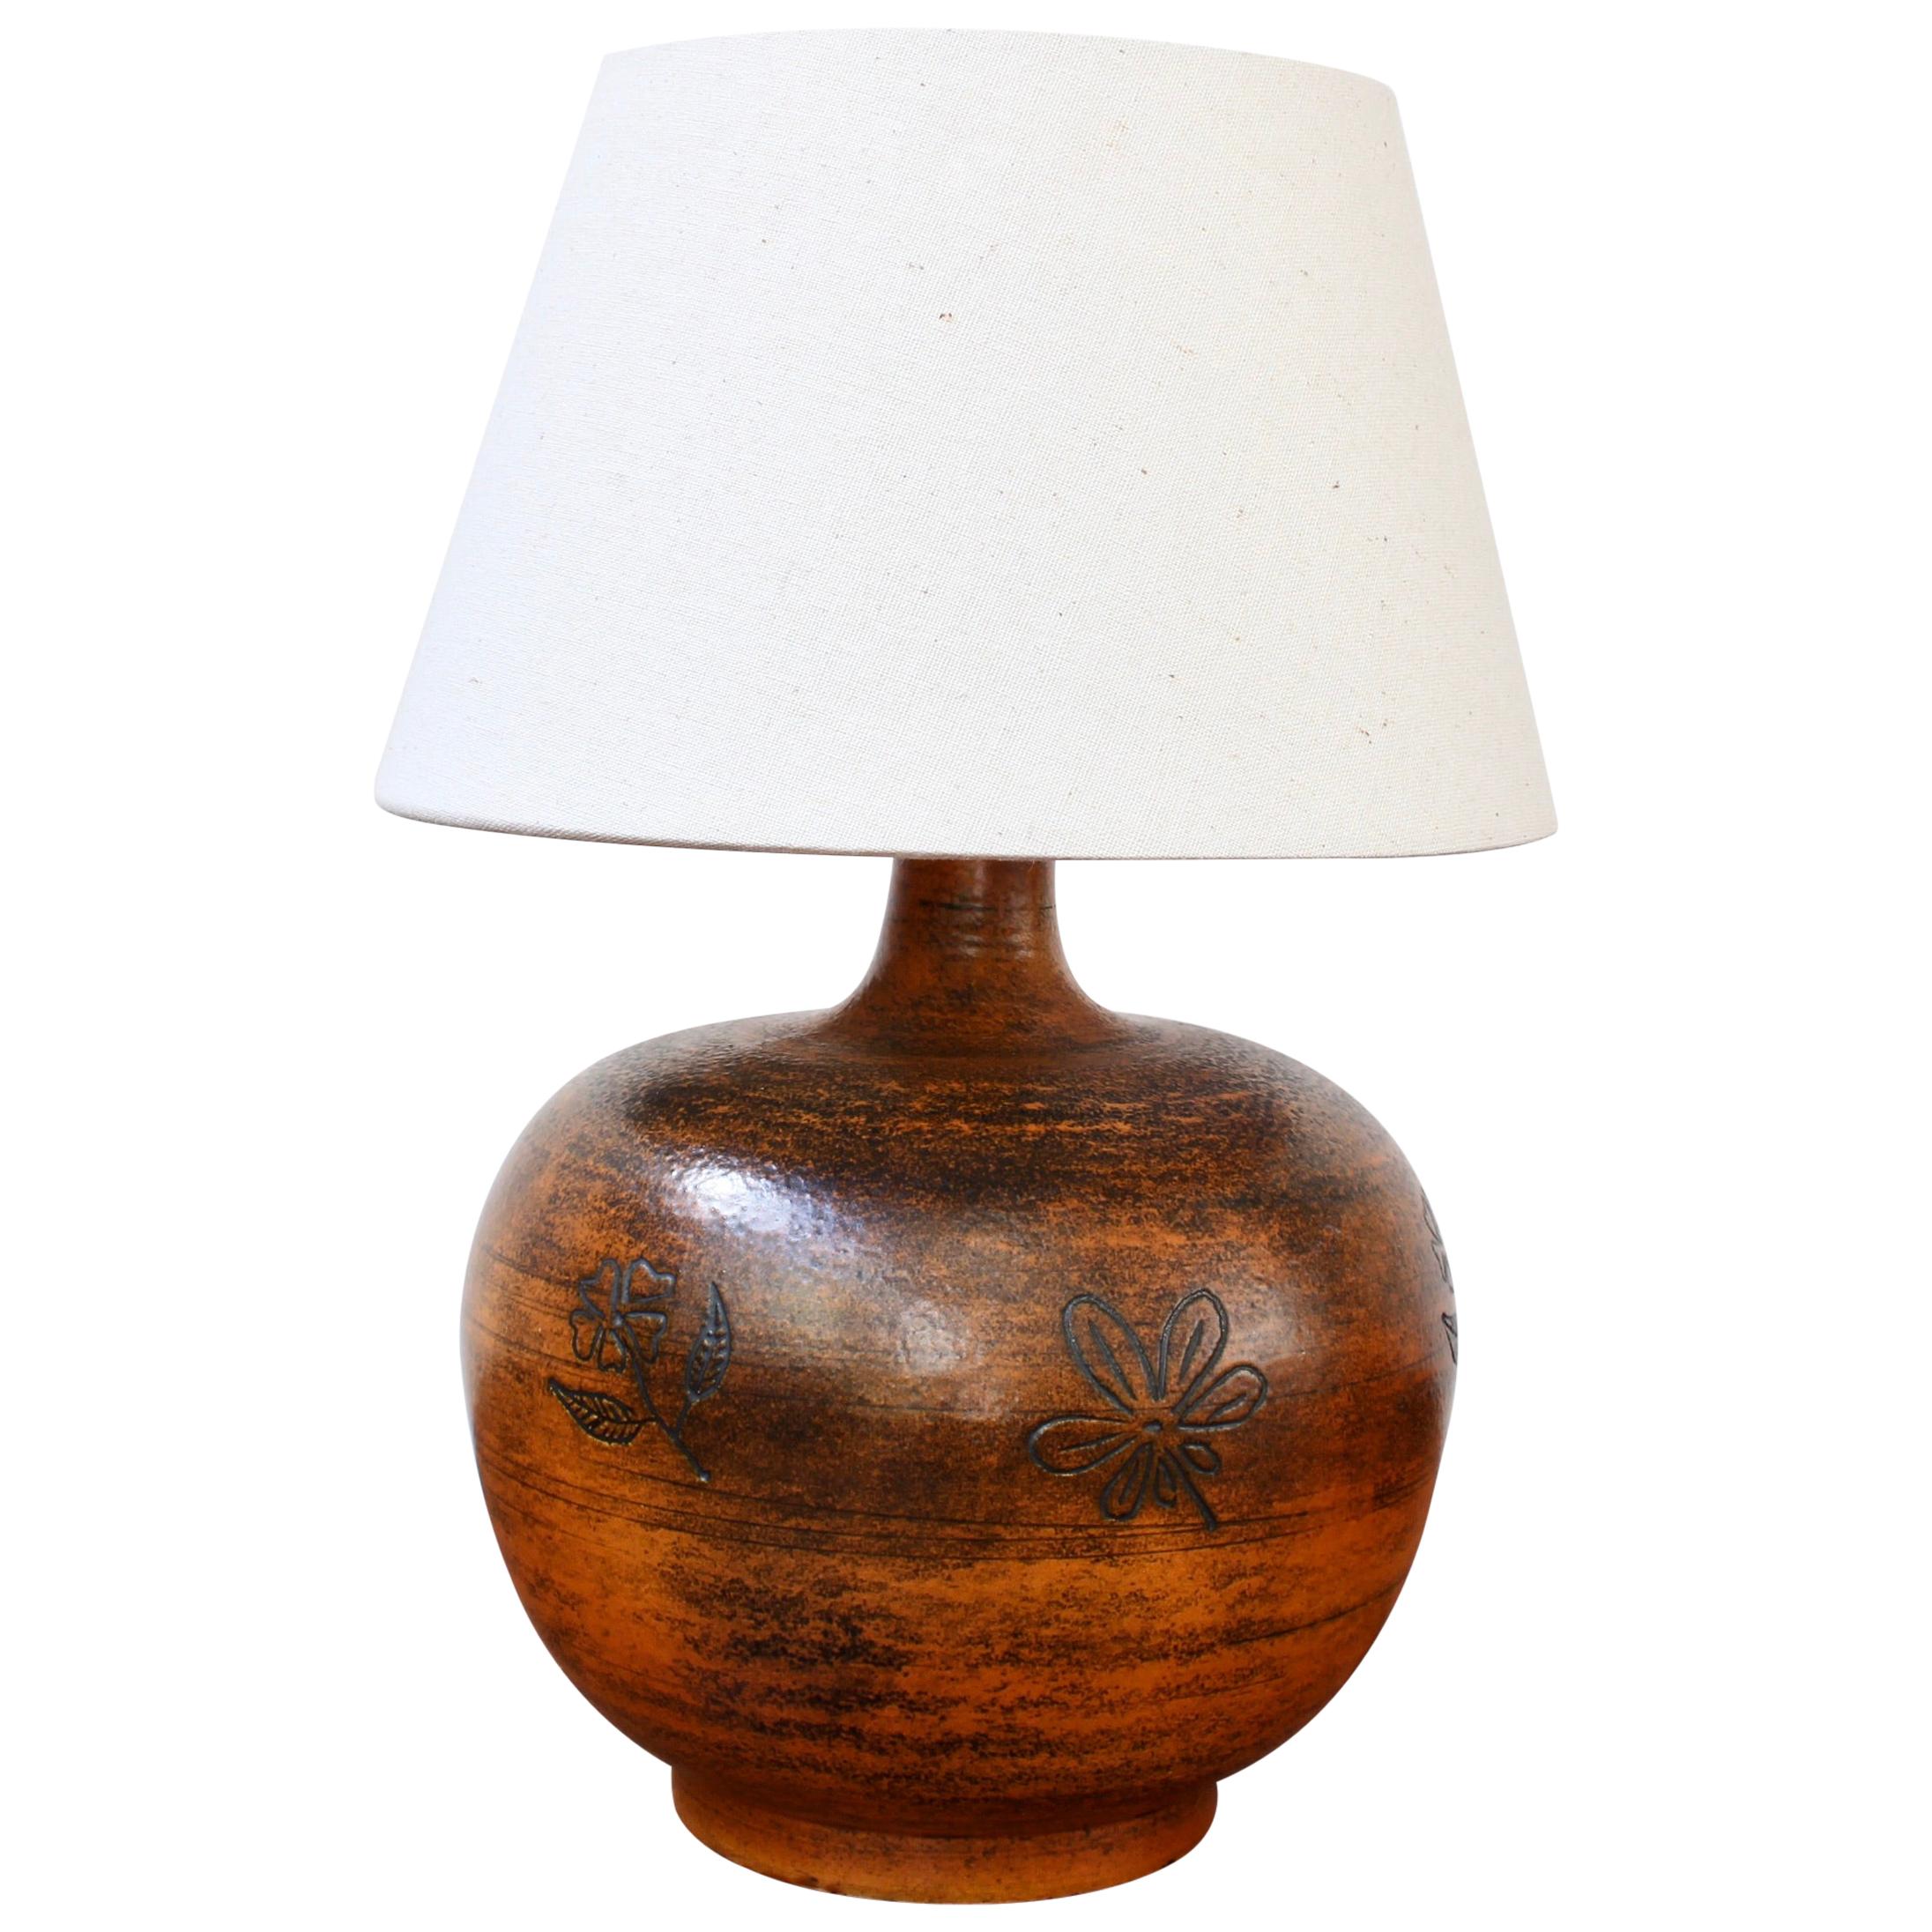 Midcentury French Ceramic Table Lamp by Jacques Blin 'circa 1950s'